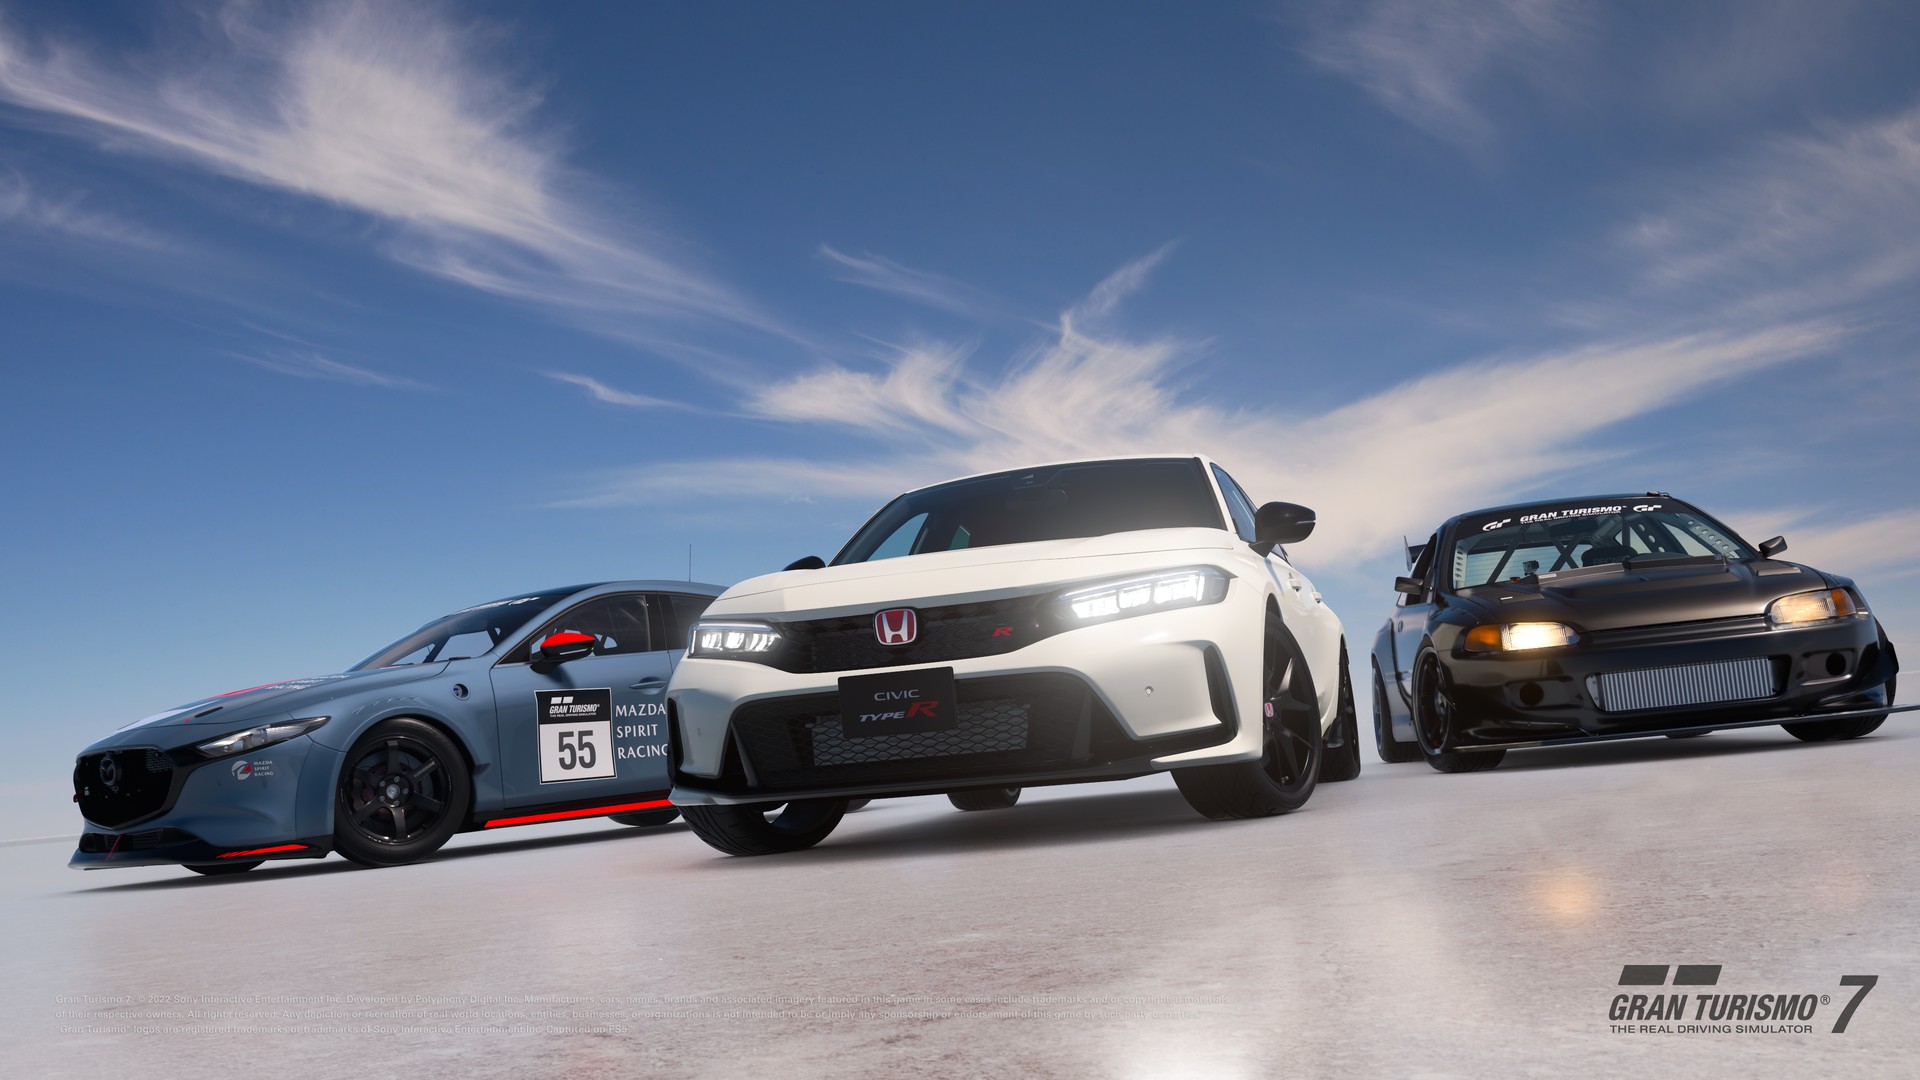 Here are the three new cars coming to Gran Turismo 7 on 25th April